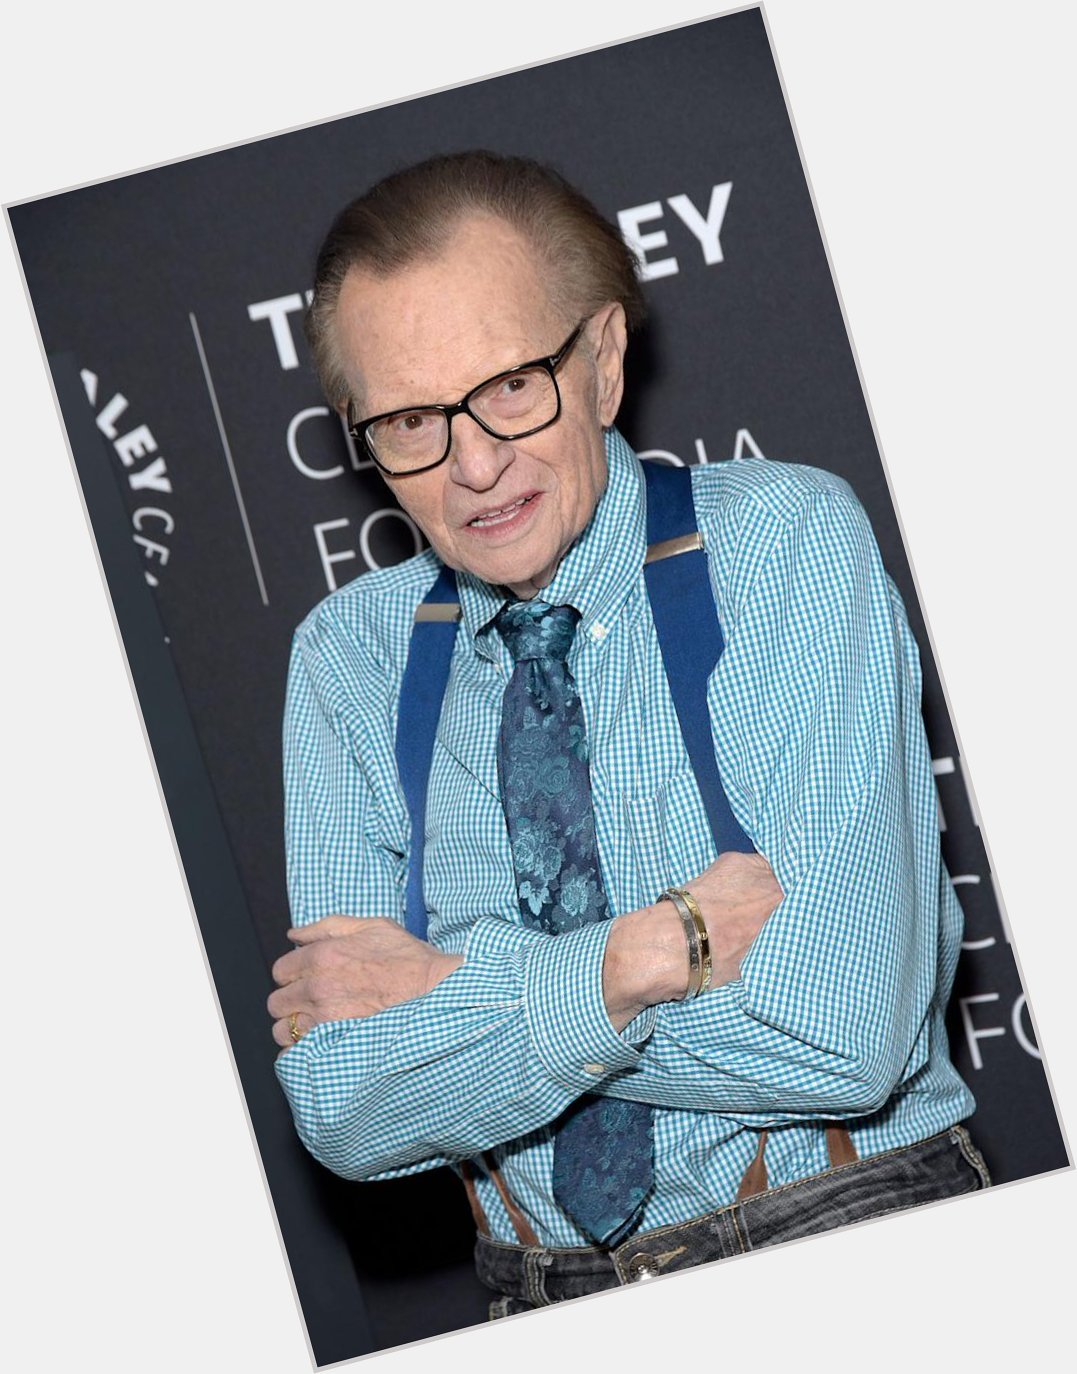 HAPPY BIRTHDAY TO THE LATE LARRY KING WHO WOULD\VE TURNED 89 TODAY. 